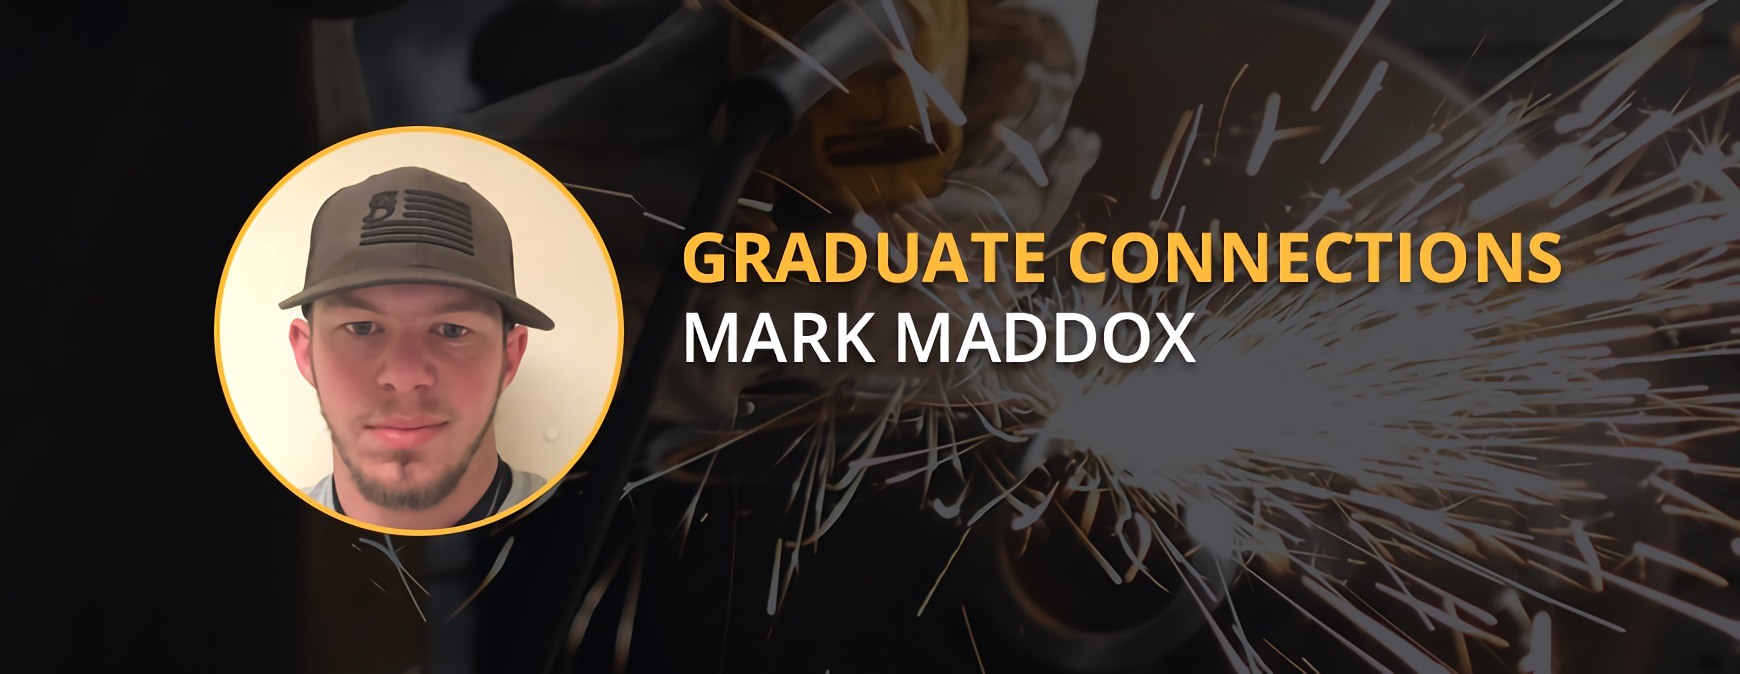 Mark Maddox Graduate Connections